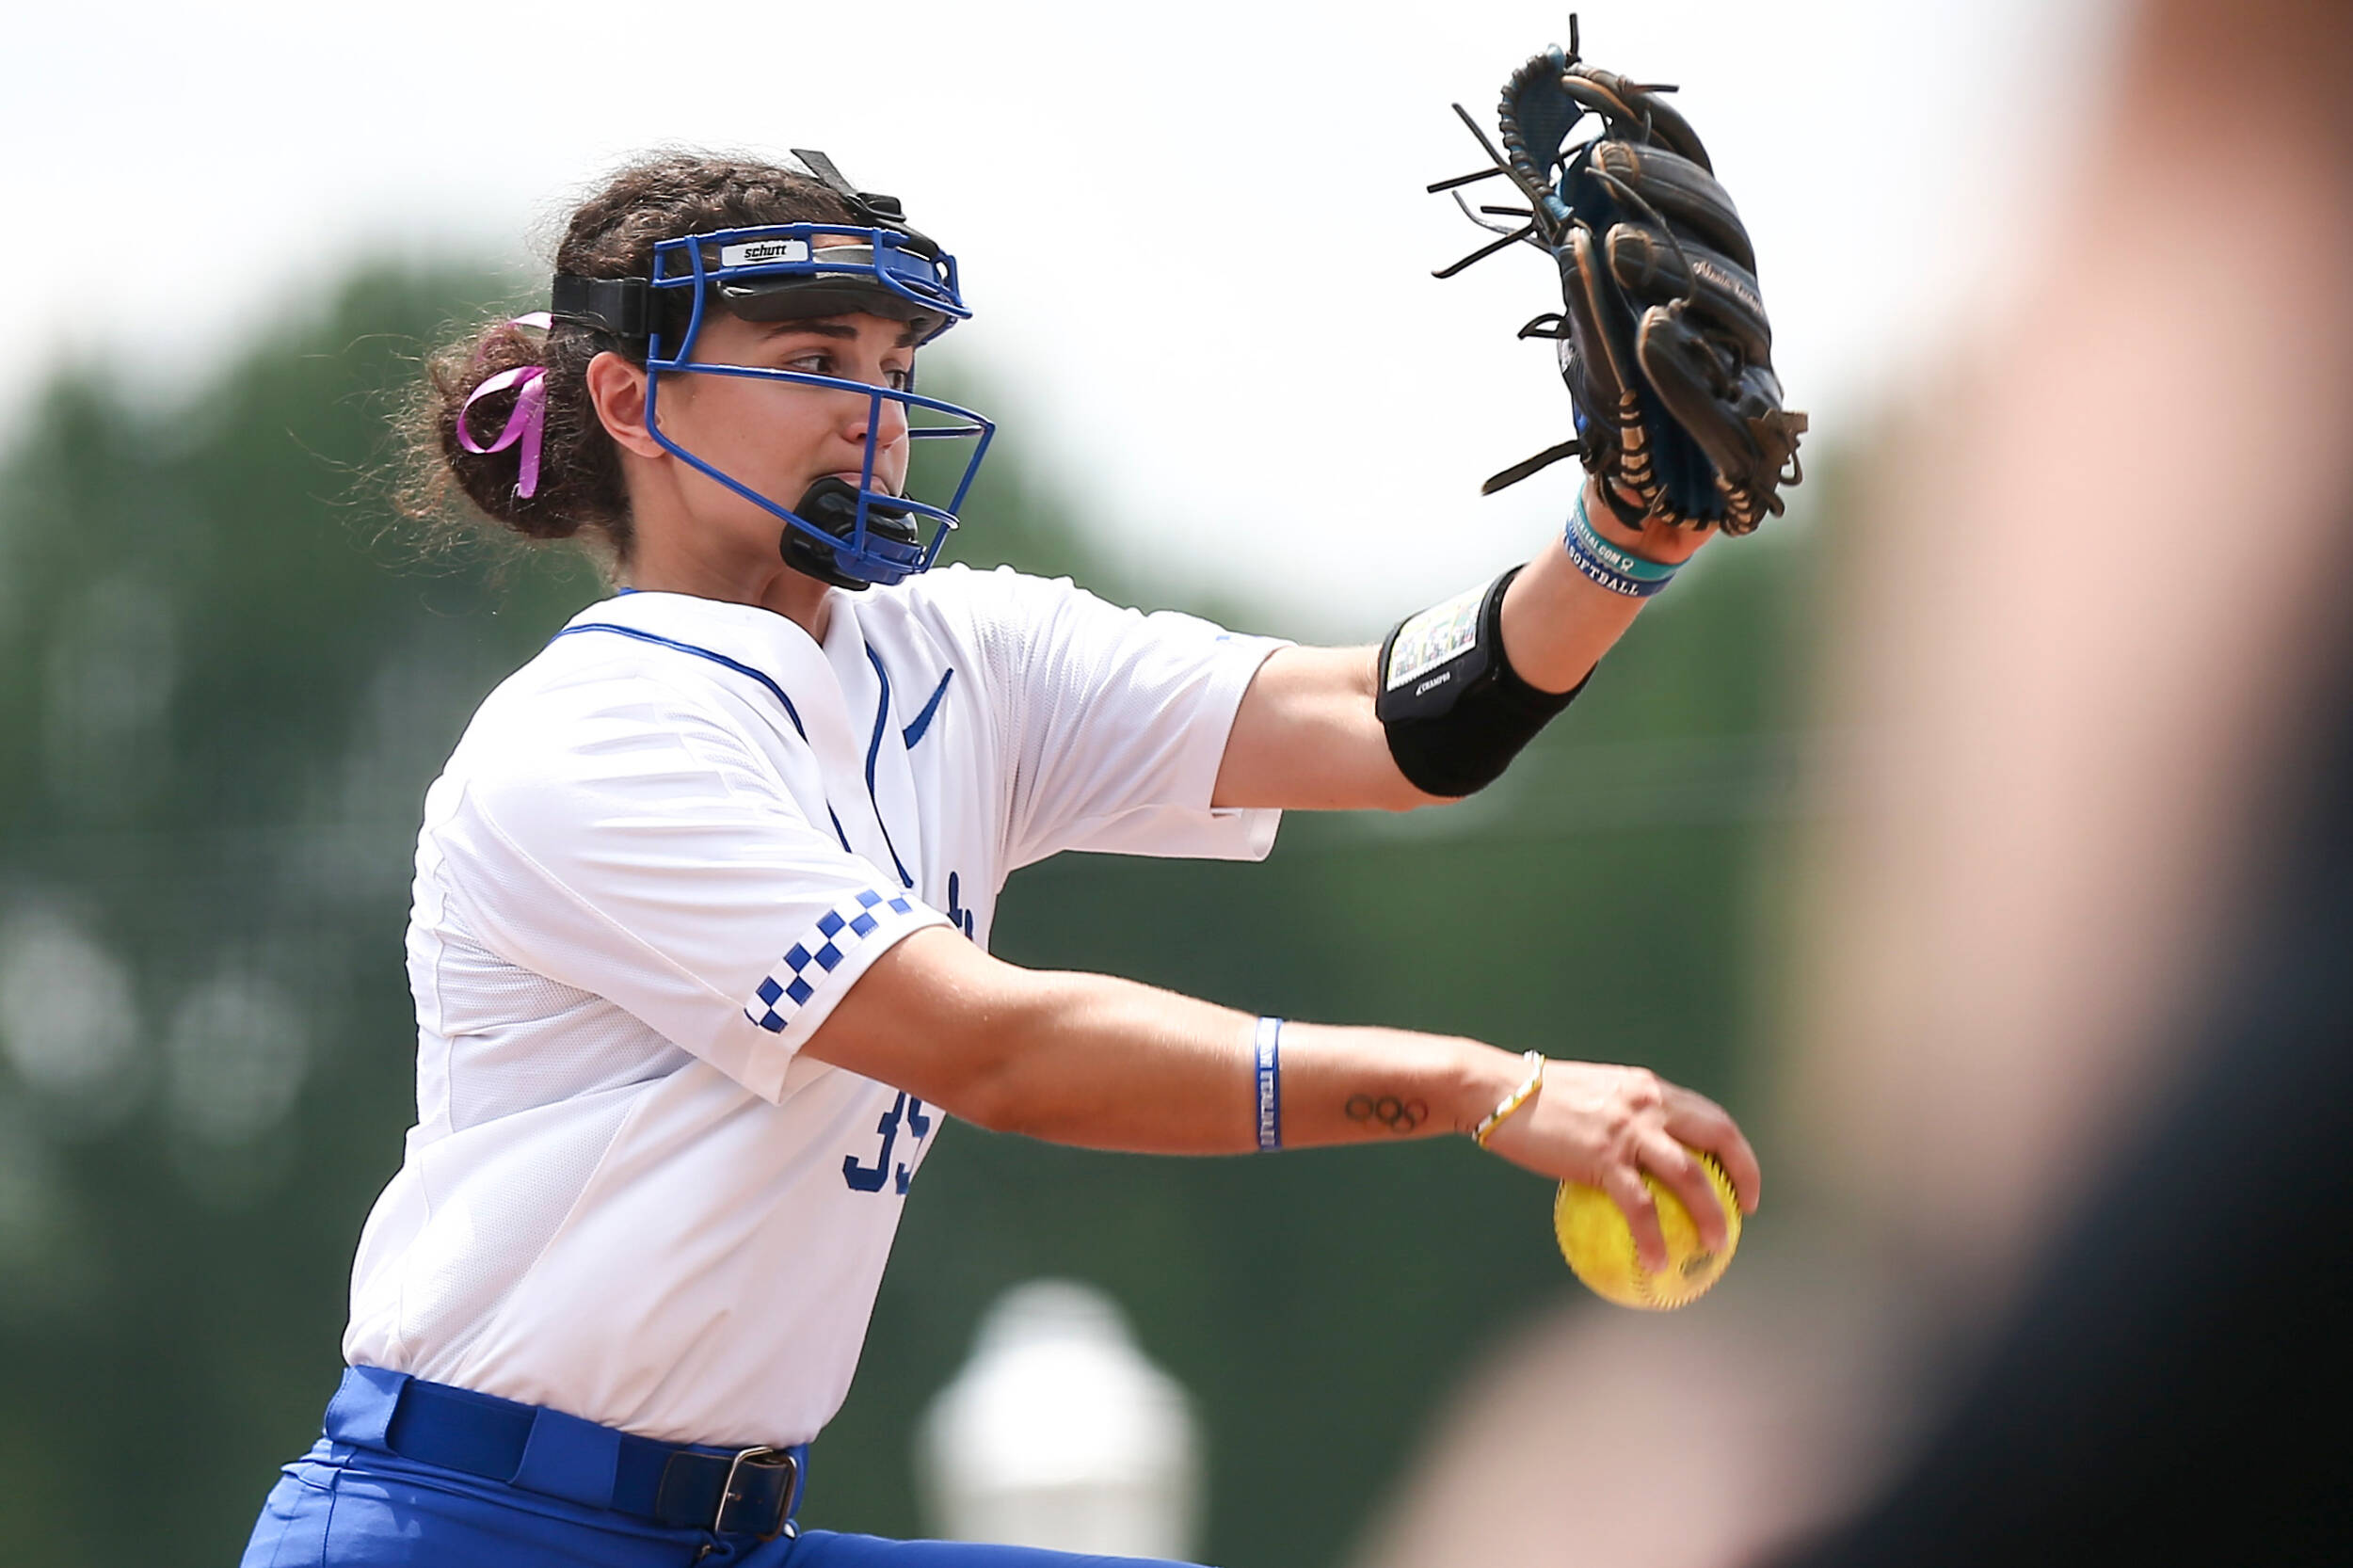 Lacatena Leads Italy to Bronze in European Softball Championships